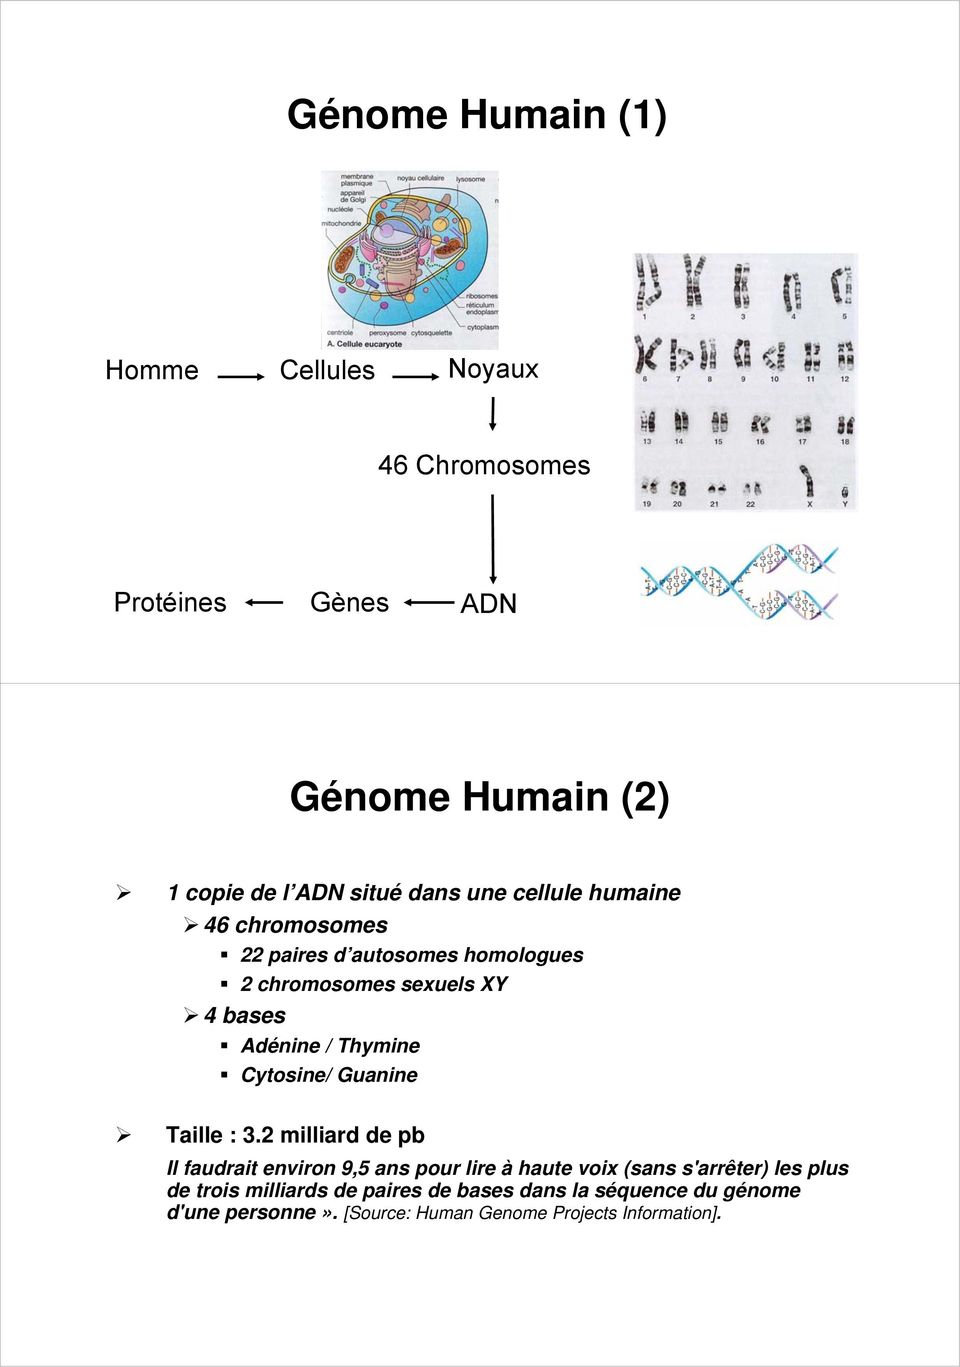 Cytosine/ Guanine Taille :.